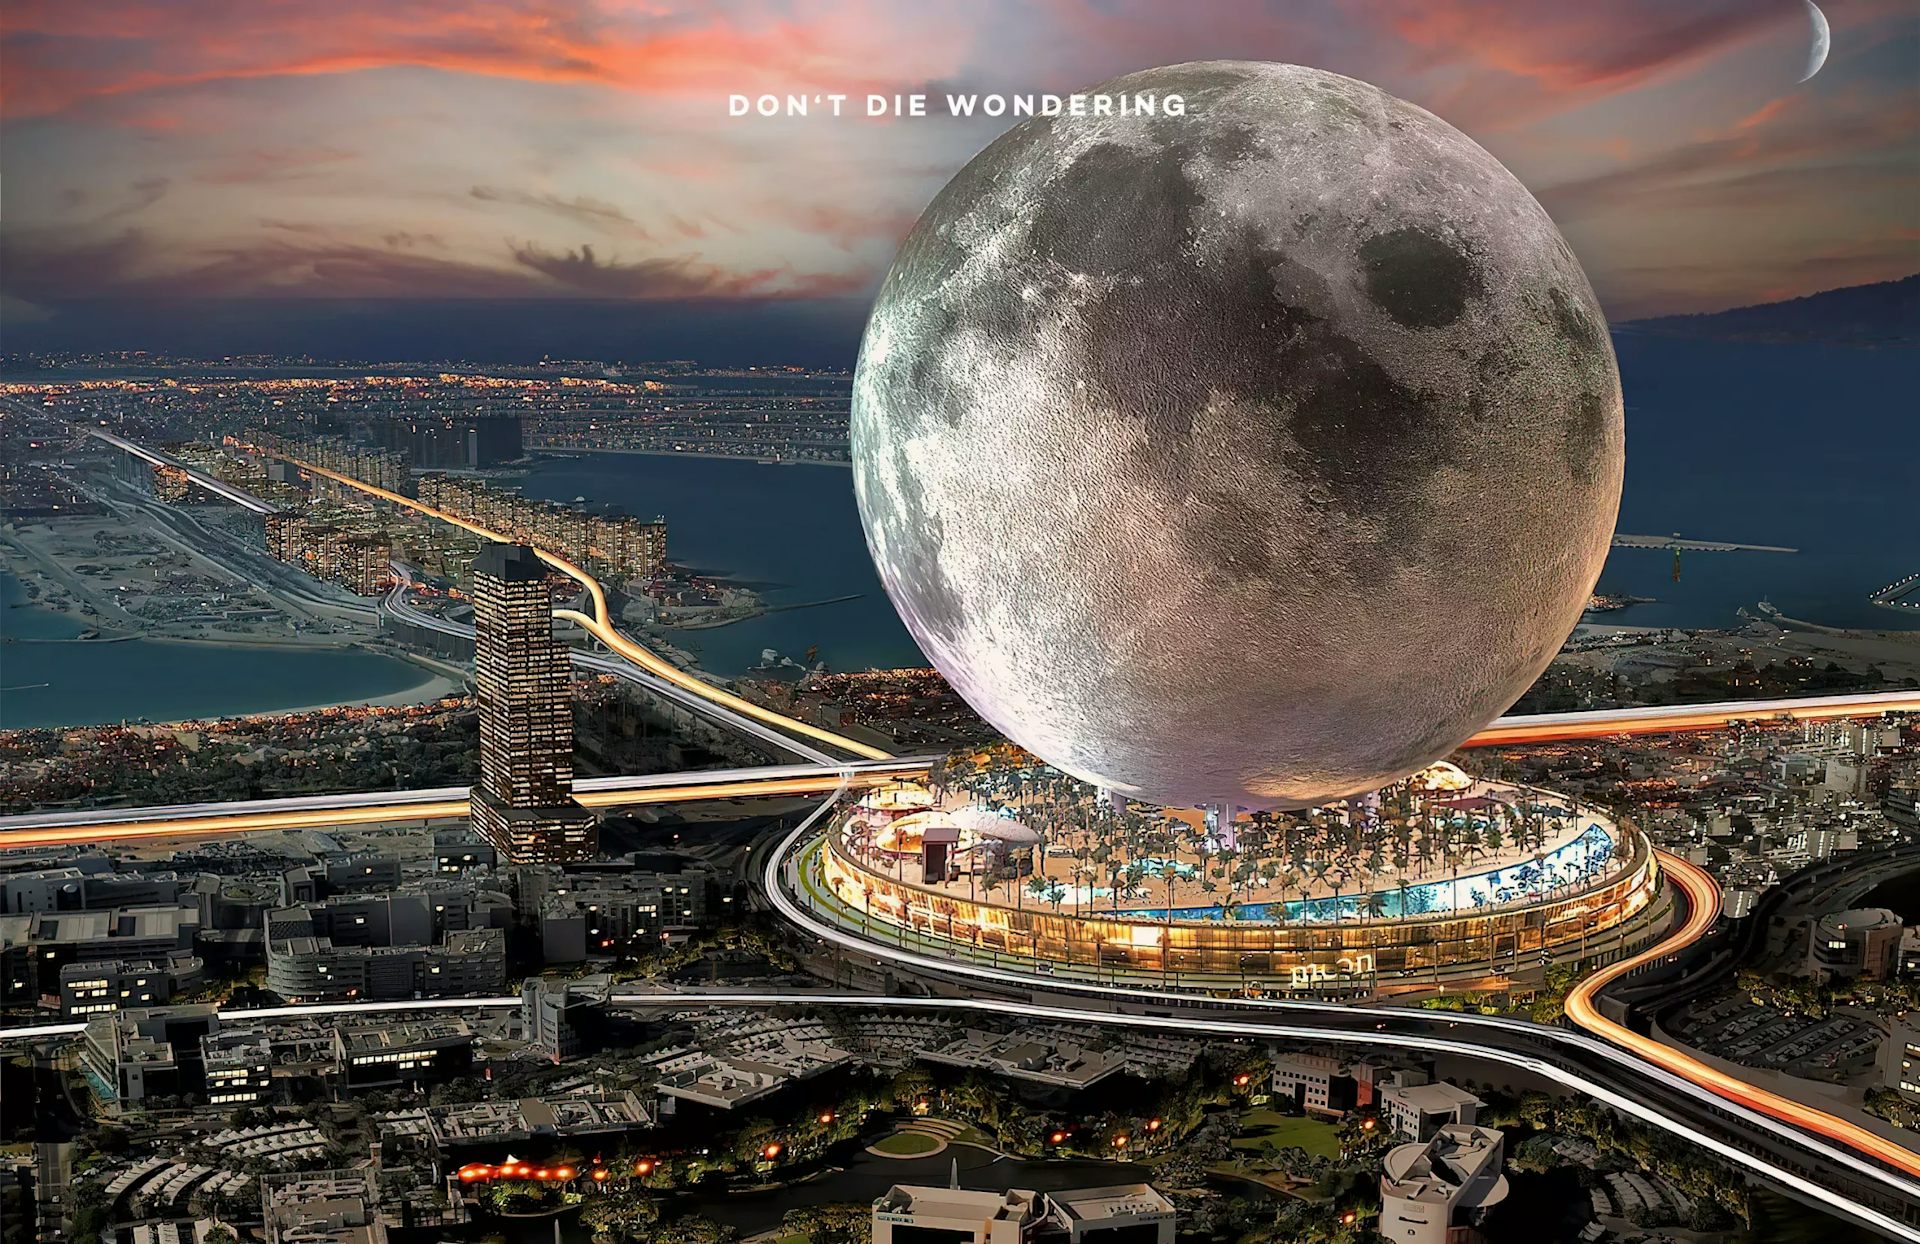 No Need for Spaceships; A Moon-Shaped Resort May Be On Its Way